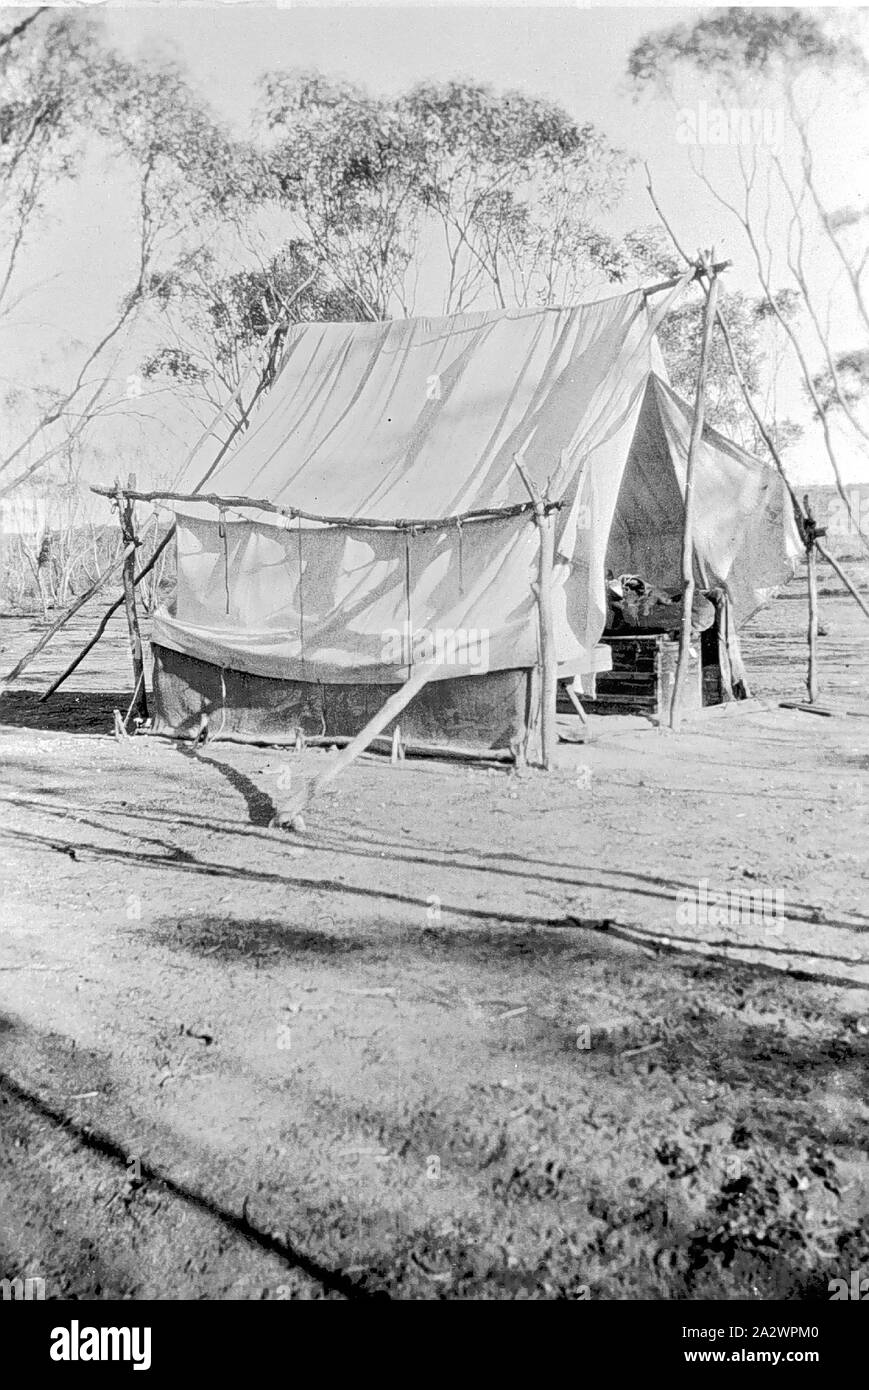 Negative - Annuello, Victoria, 1922, A tent which provided temporary accommodation while the farmhouse was being built Stock Photo